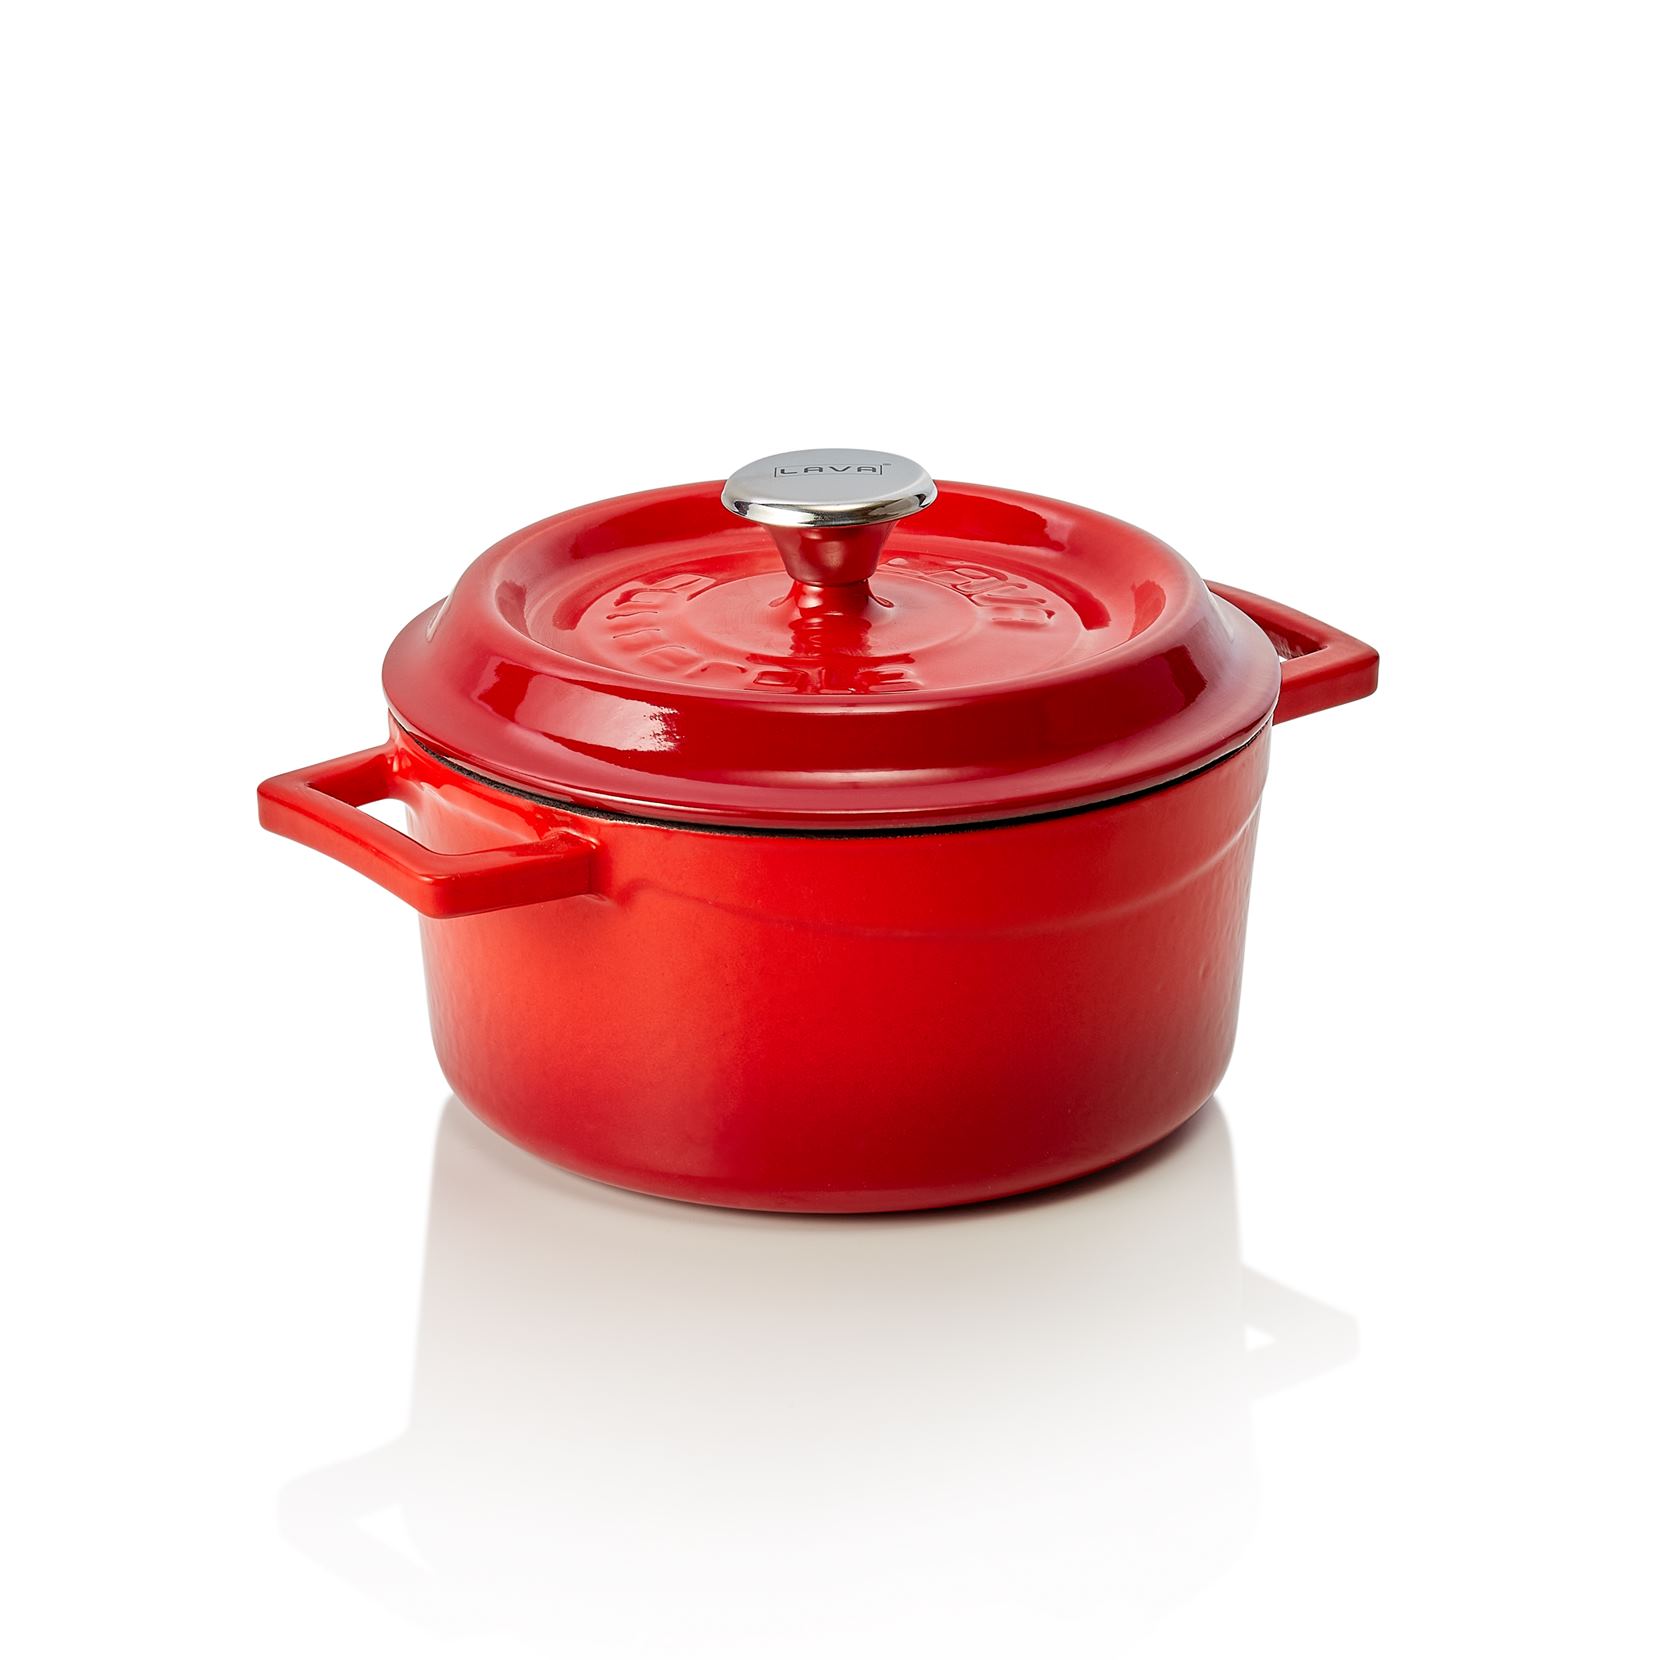 Cocotte LAVA®, Ø 16,5 cm, rot, Gusseisen emailliert